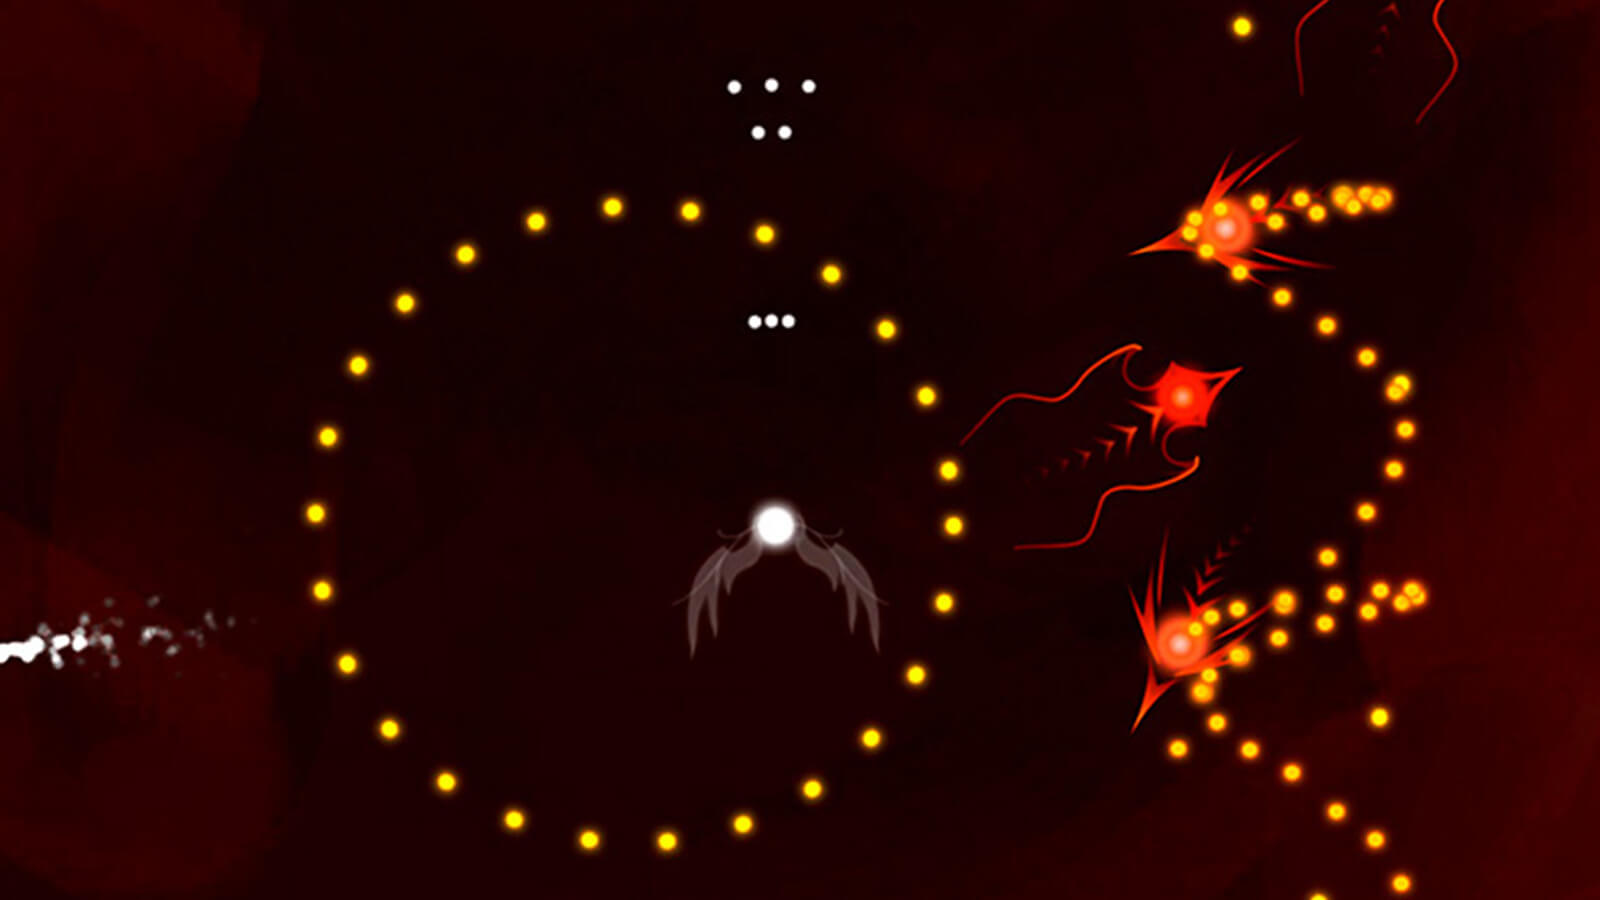 A winged orb of light is surrounded by yellow dots and abstract red entities.